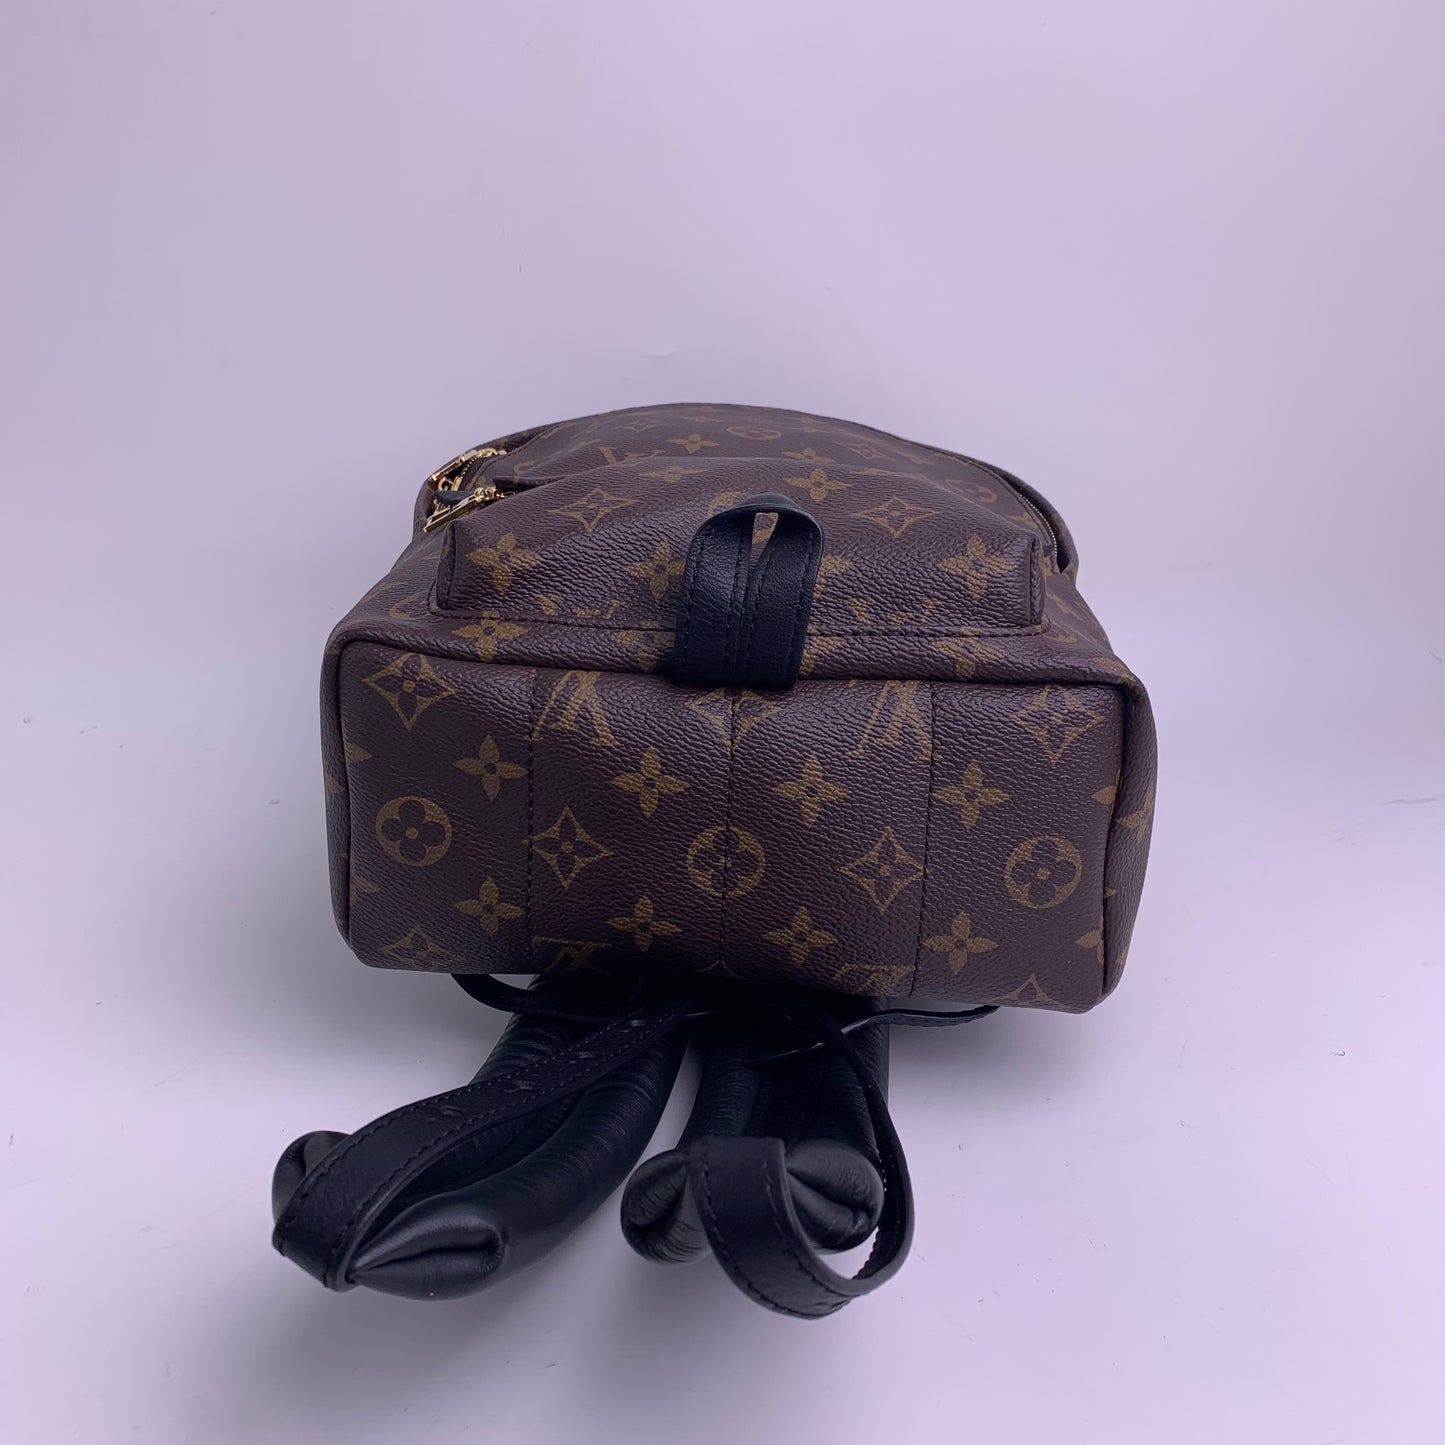 【DEAL】Pre-owned Louis Vuitton Coated Canvas Backpacks Palm Springs Monogram Backpack-HZTT